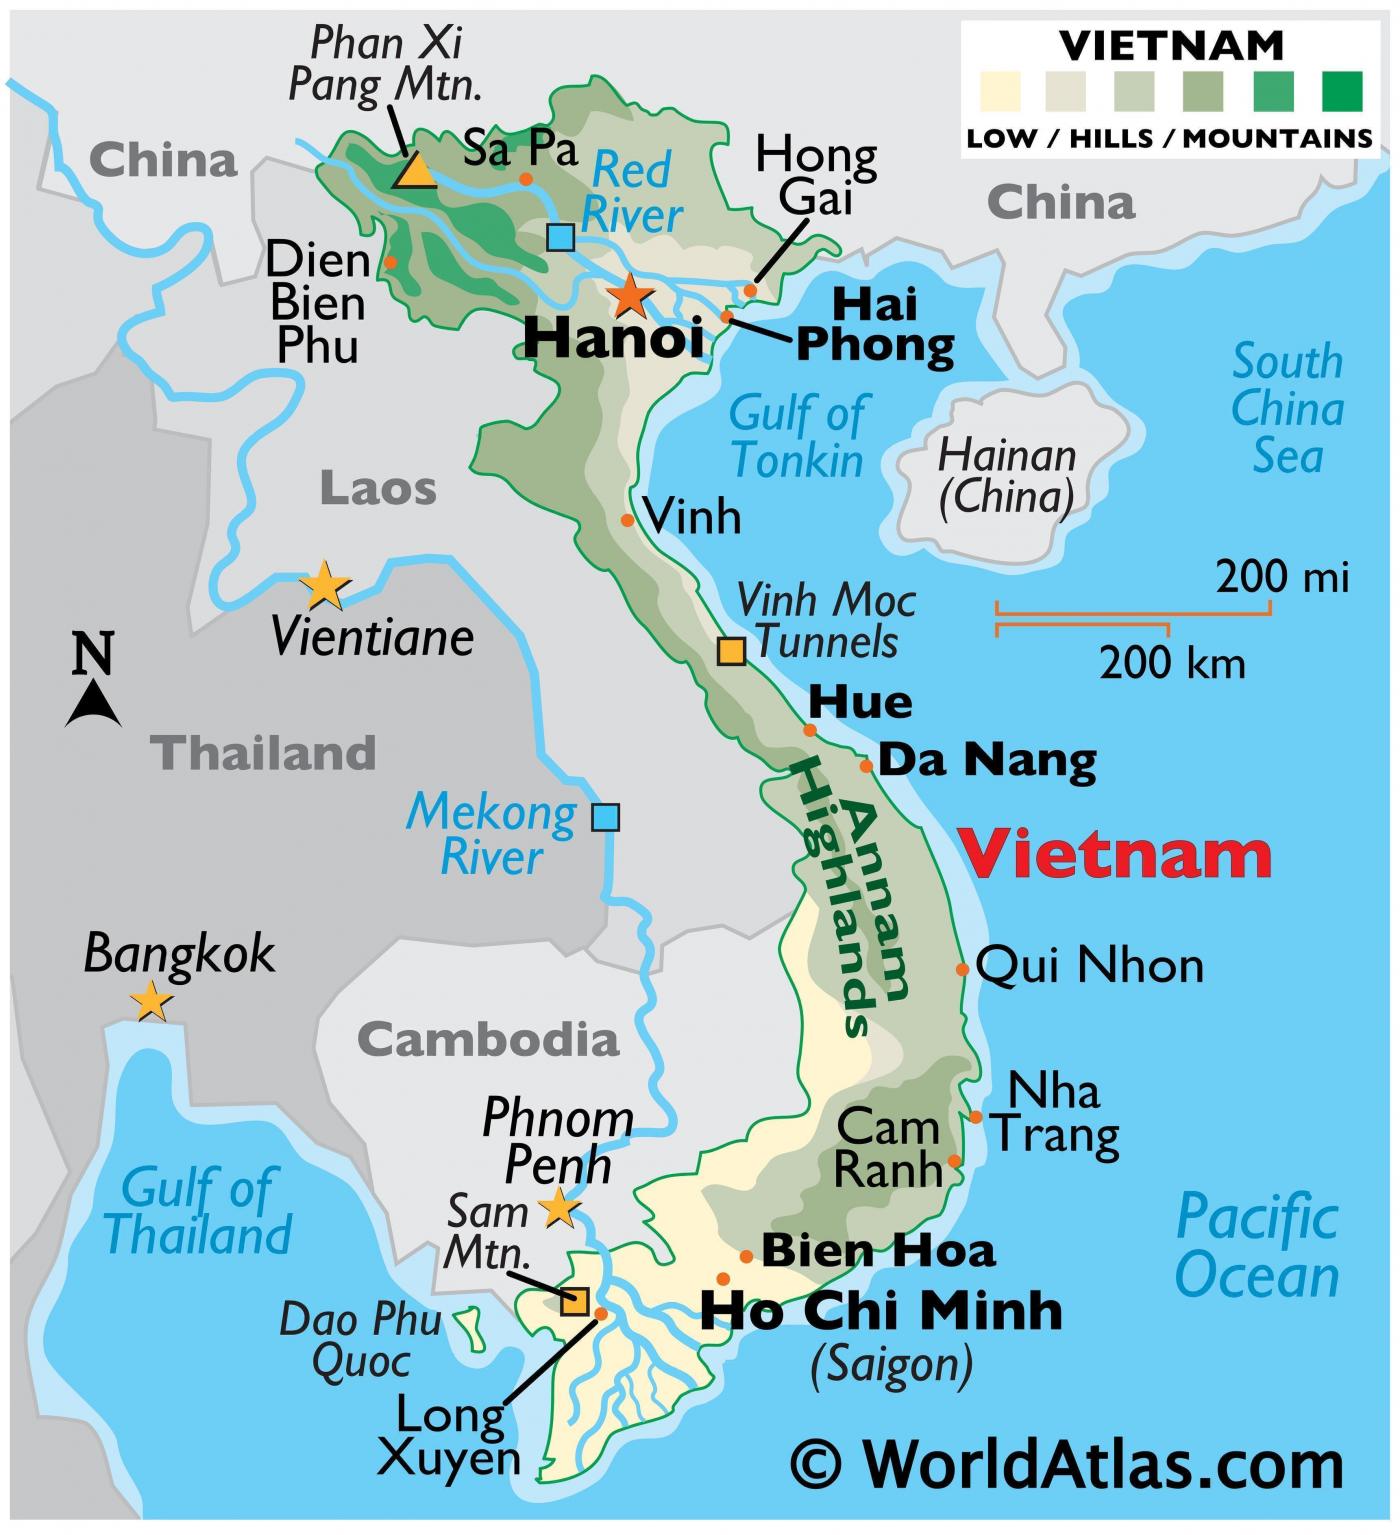 A map of Vietnam, showing the different regions of the country